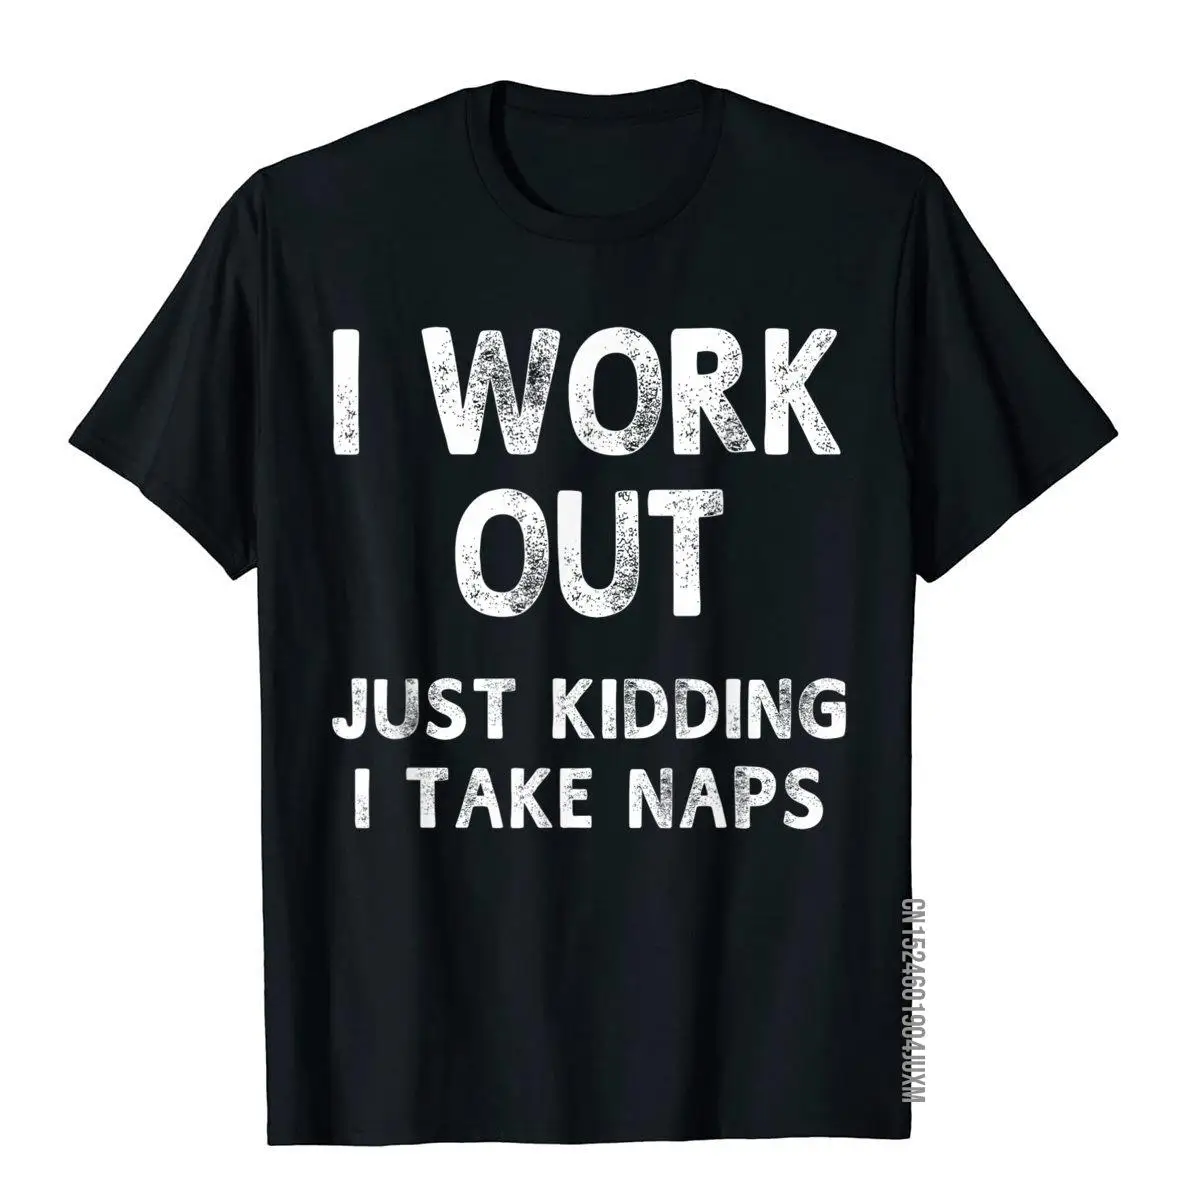 

I Work Out Just Kidding I Take Naps Funny Humorous T-Shirt Popular Classic T Shirts Cotton Men's Tops & Tees Summer